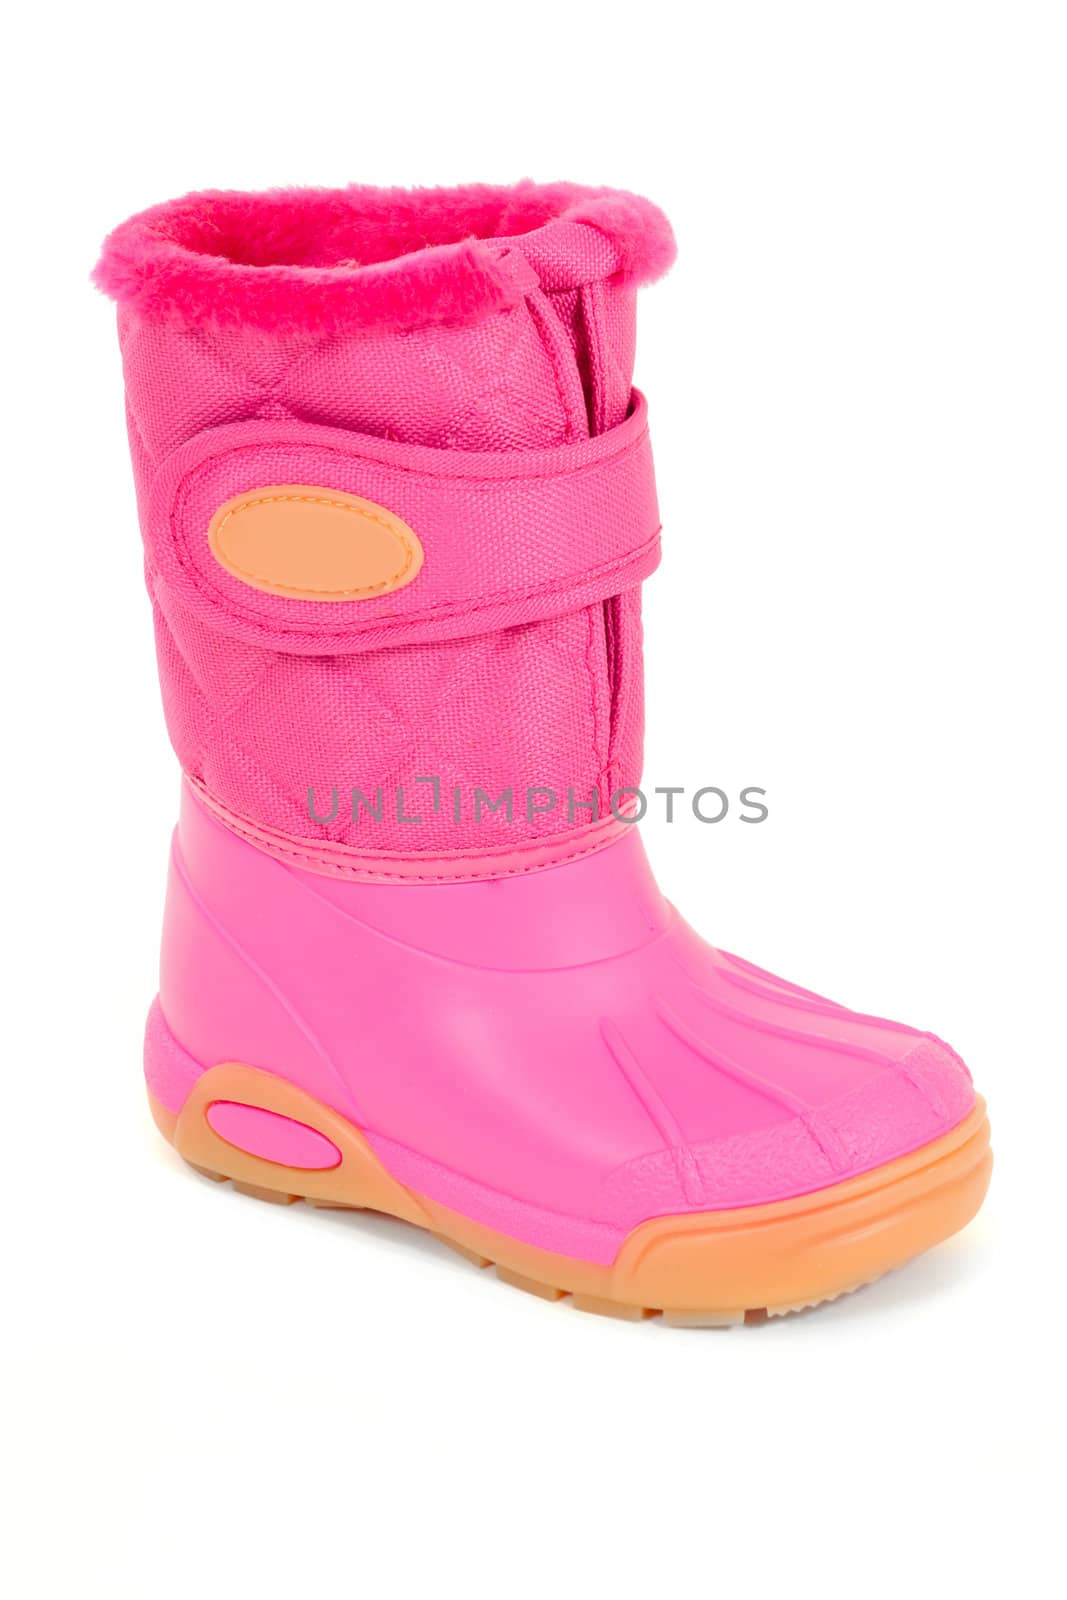 Pink winter boot by cfoto